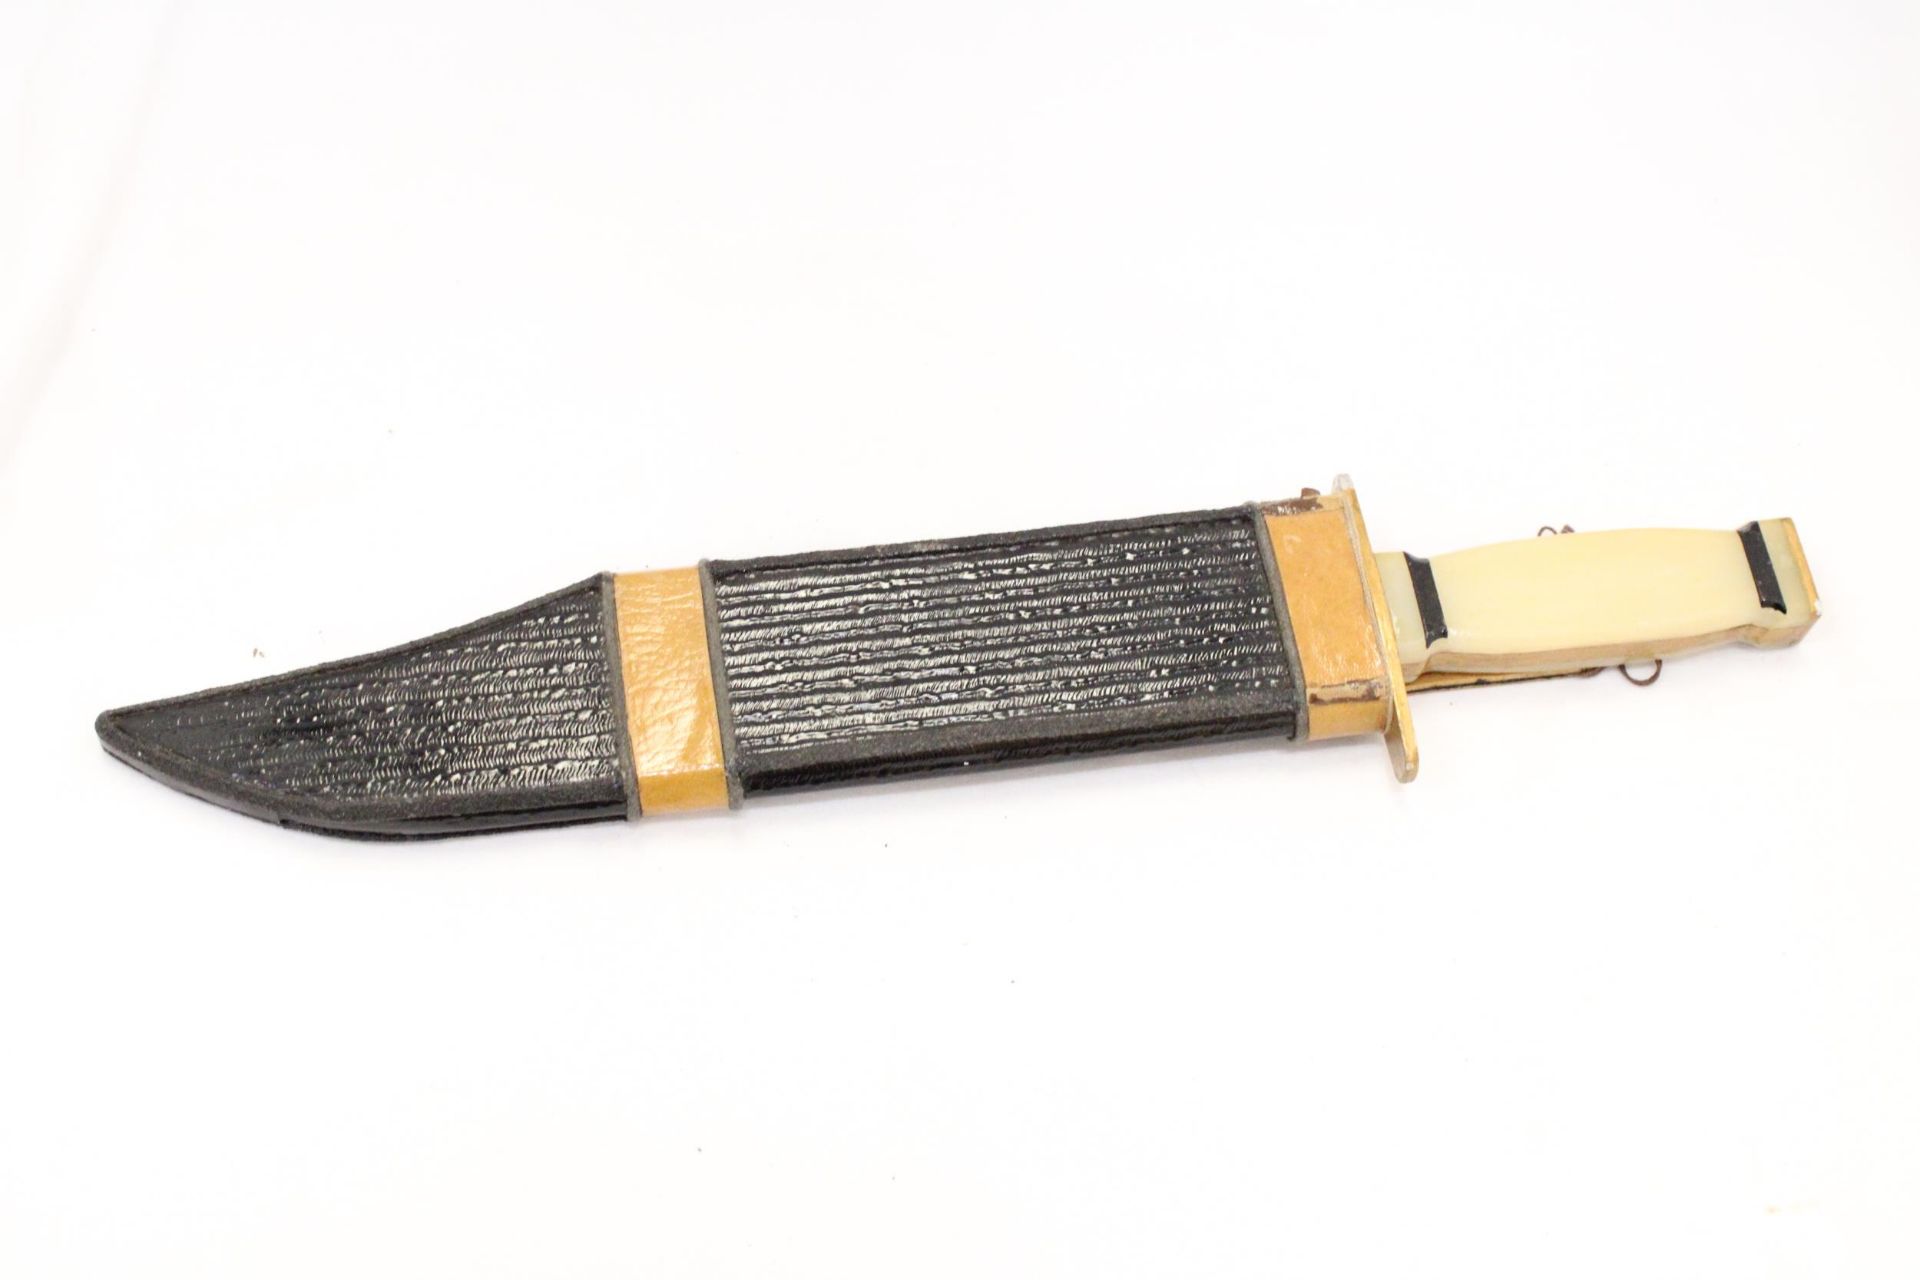 A BOWIE KNIFE IN SHEATH - APPROXIMATELY 40CM LONG - Image 4 of 4